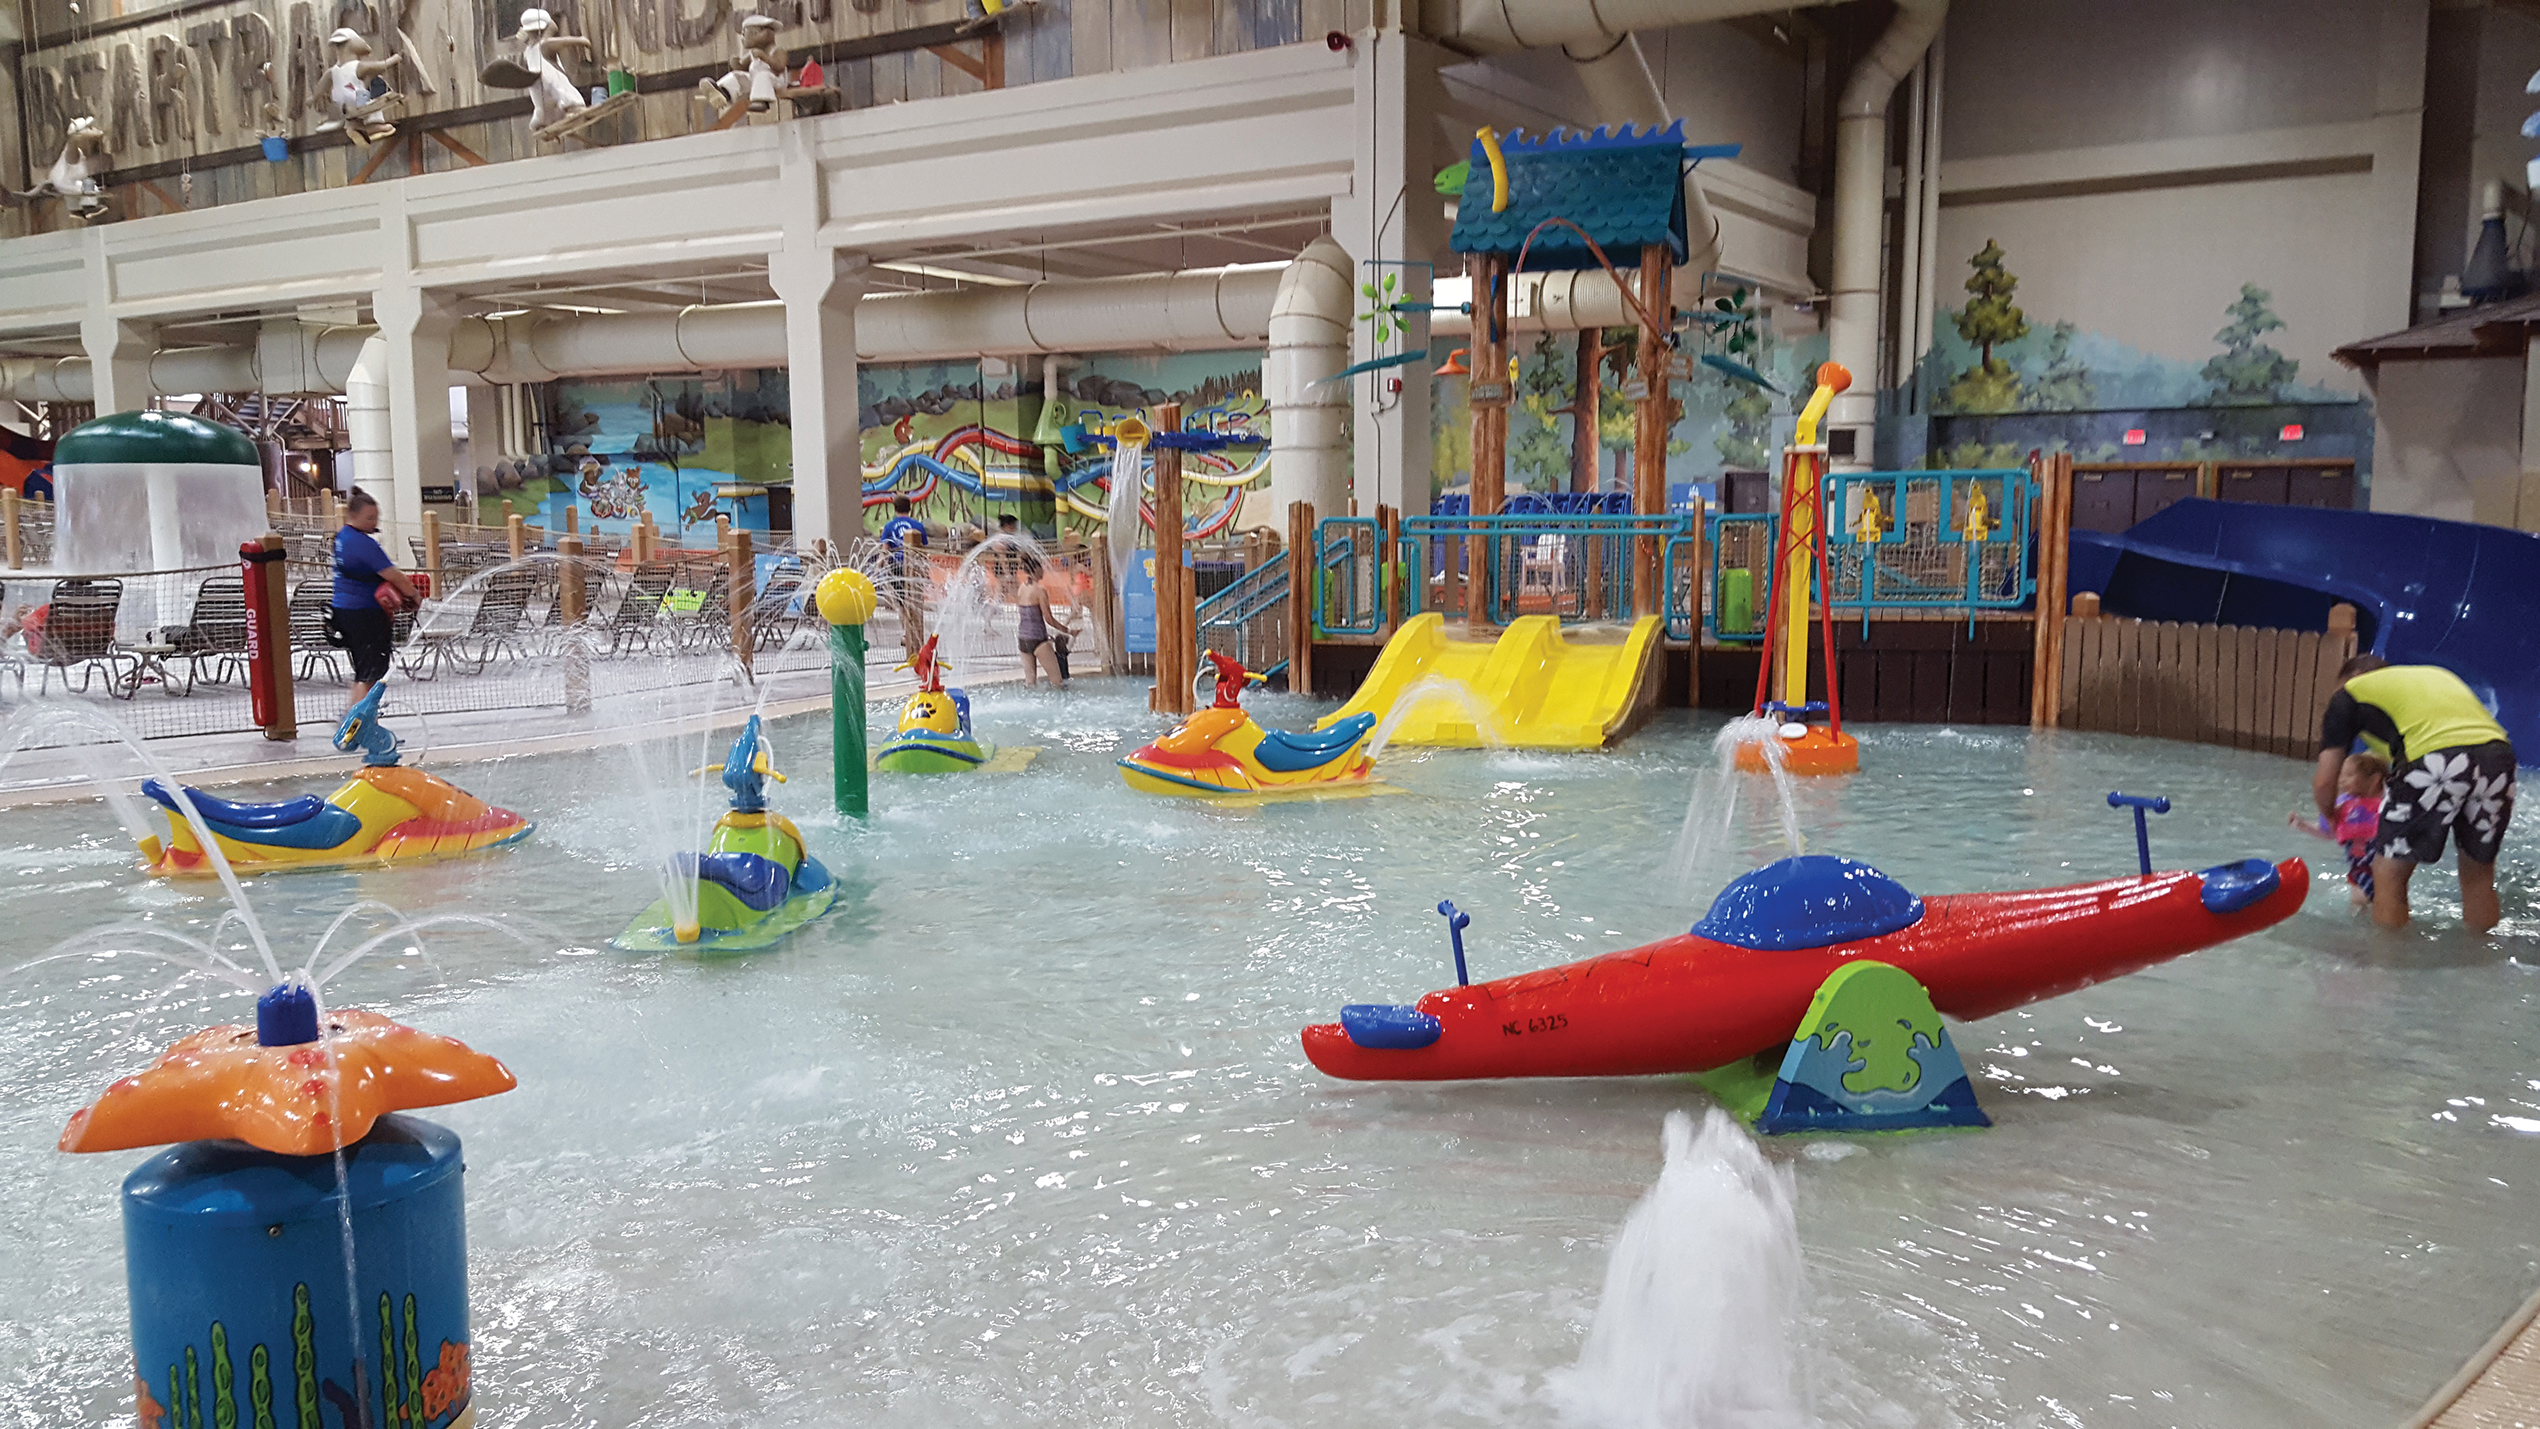 Splash Time at the Great Wolf Lodge